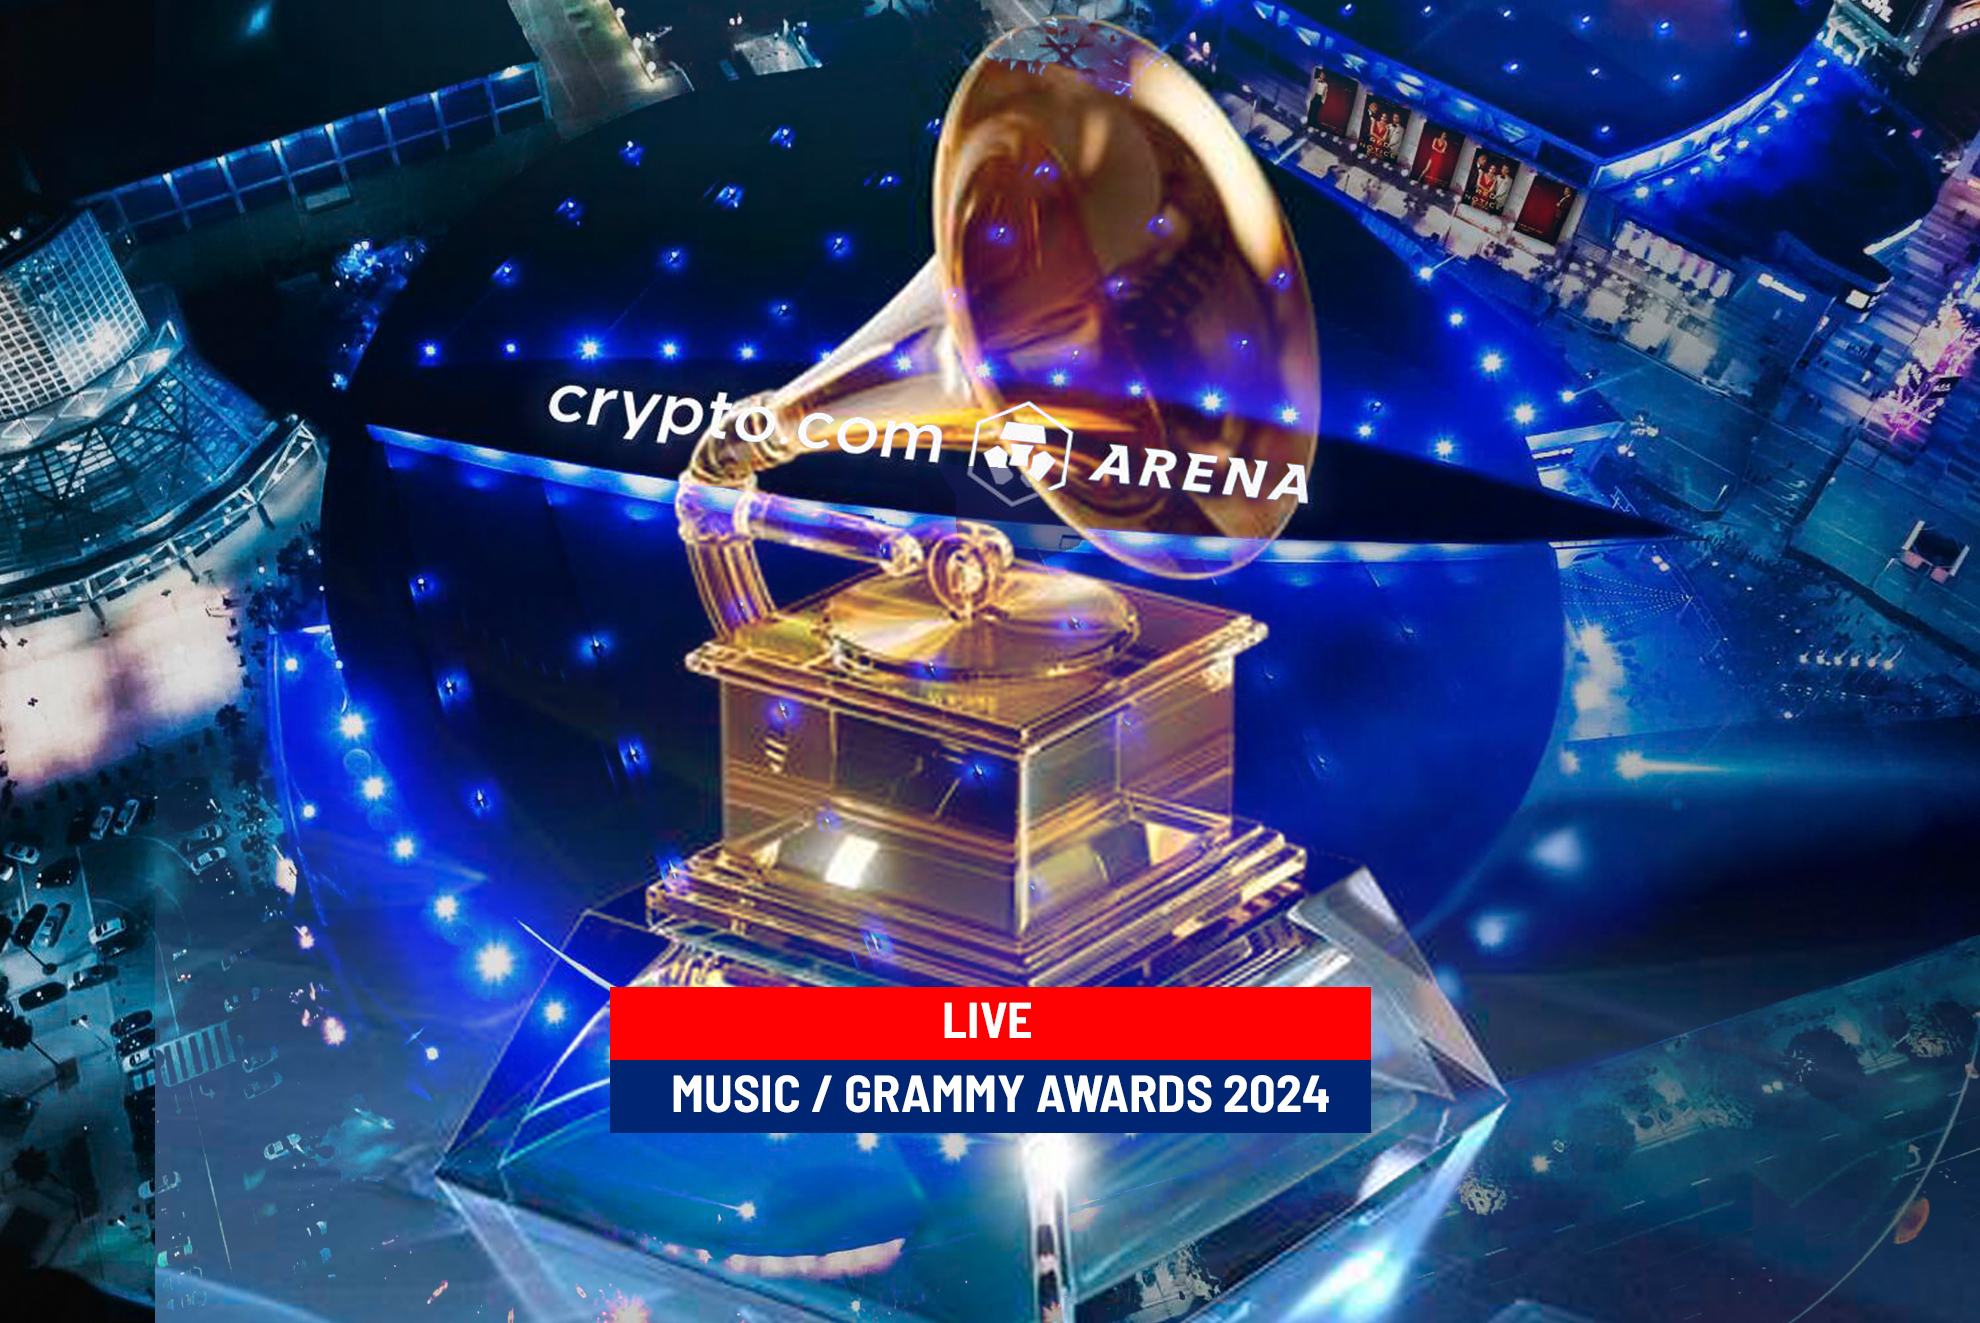 66th Annual Grammy Music Awards: live updates from Crypto.com Arena in Los Angeles, CA.